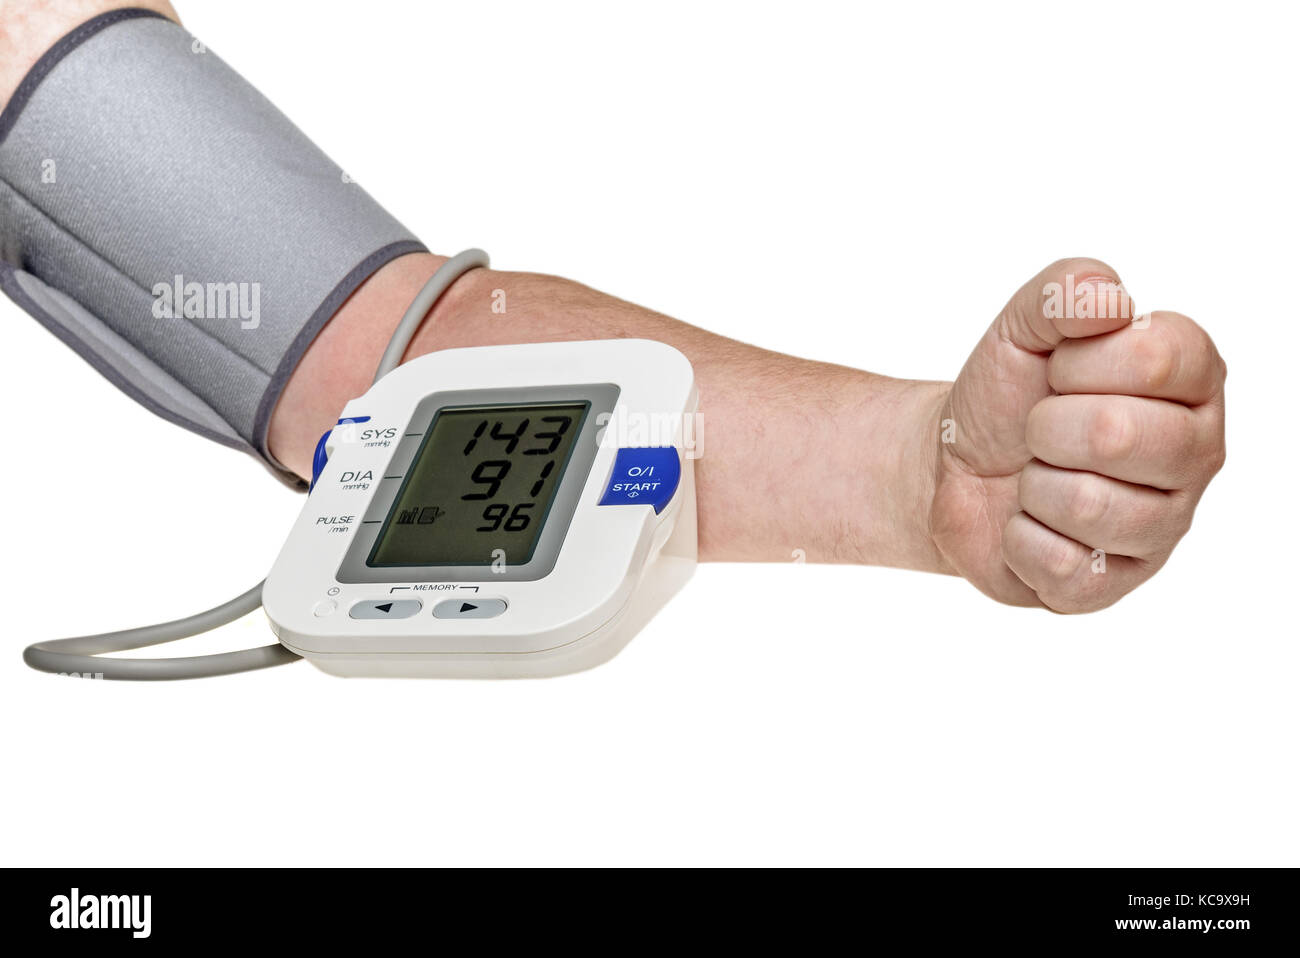 https://c8.alamy.com/comp/KC9X9H/blood-pressure-check-test-monitor-exam-male-hand-and-diagnostic-tool-KC9X9H.jpg